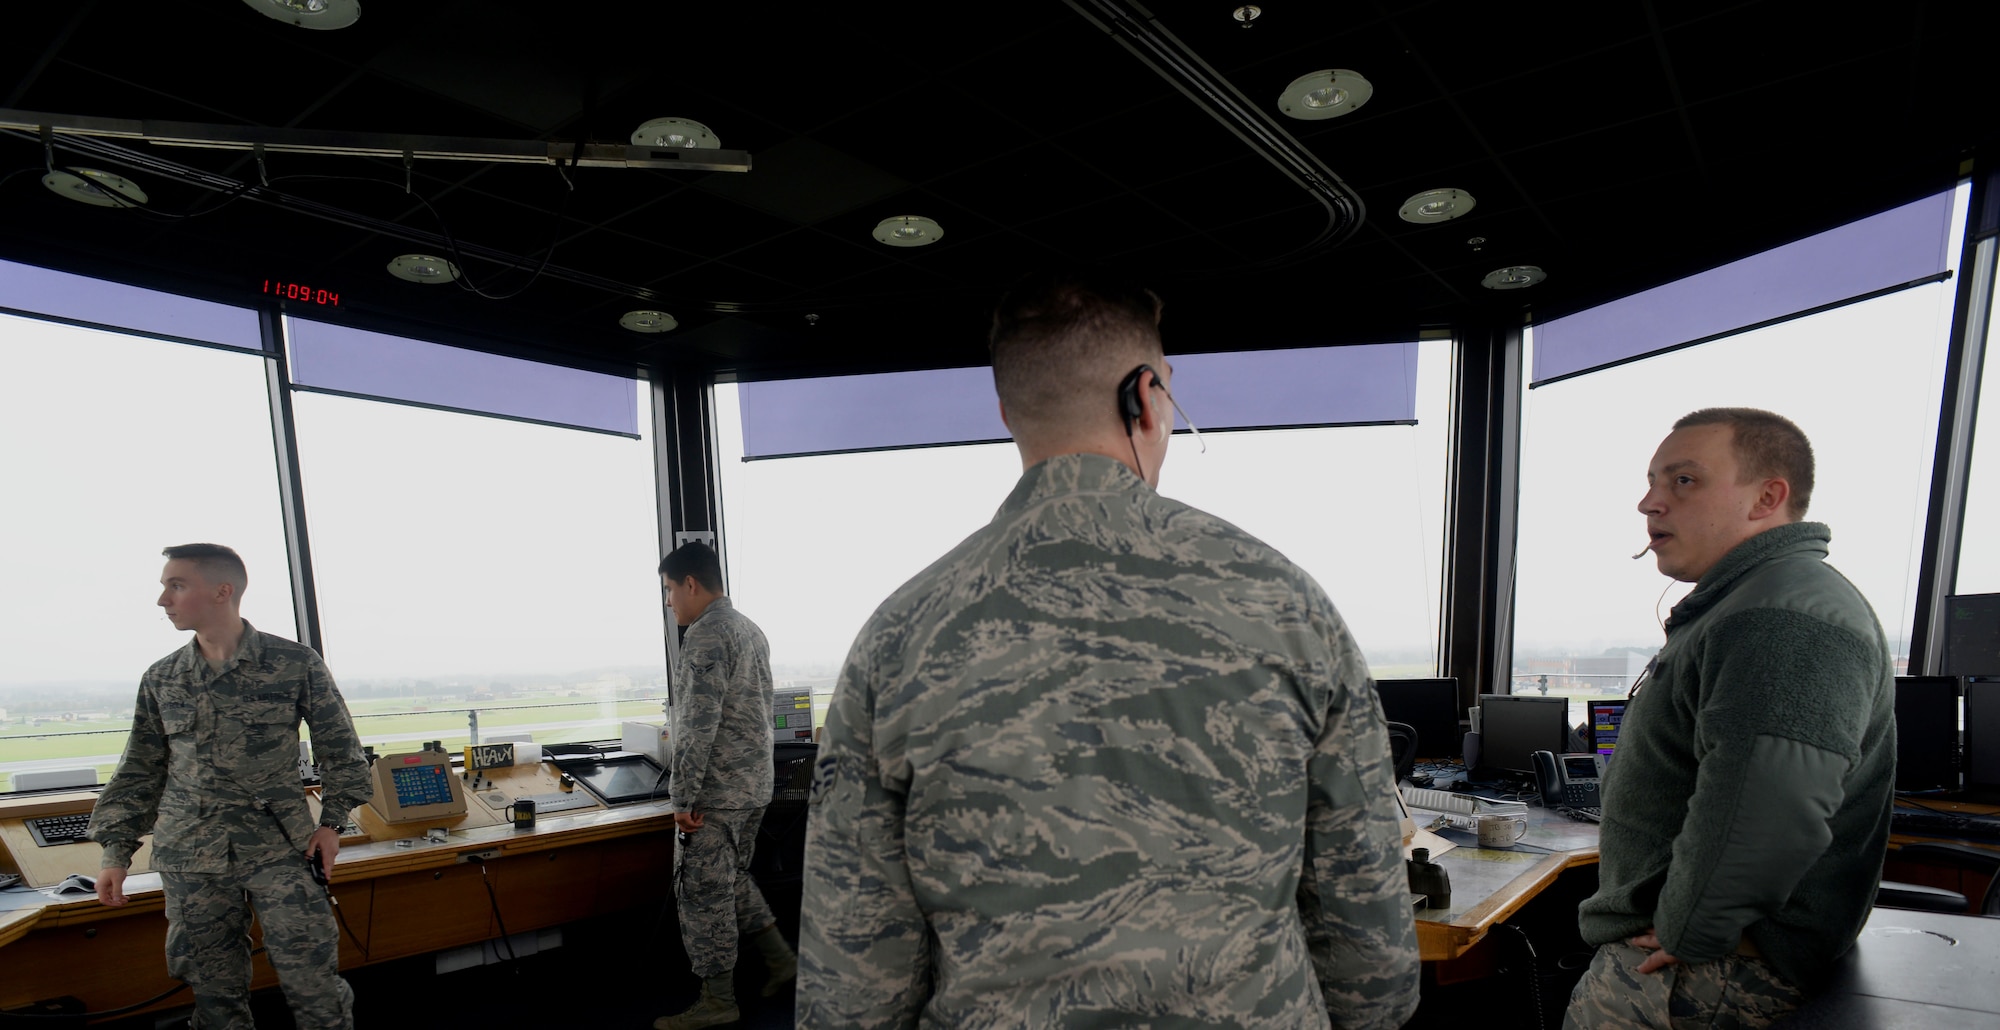 Air traffic controllers assigned to the 100th Operations Support Squadron prepare for an incoming flight at RAF Mildenhall, England, April 9, 2018. Air traffic controllers are responsible for more than just the tower; they are also charged with maintaining the ground controllers, flight data, base operations and the radar facility. All are integral pieces of the puzzle that keep Team Mildenhall refueling the fight and powering the mission. (U.S. Air Force photo by Airman 1st Class Alexandria Lee)